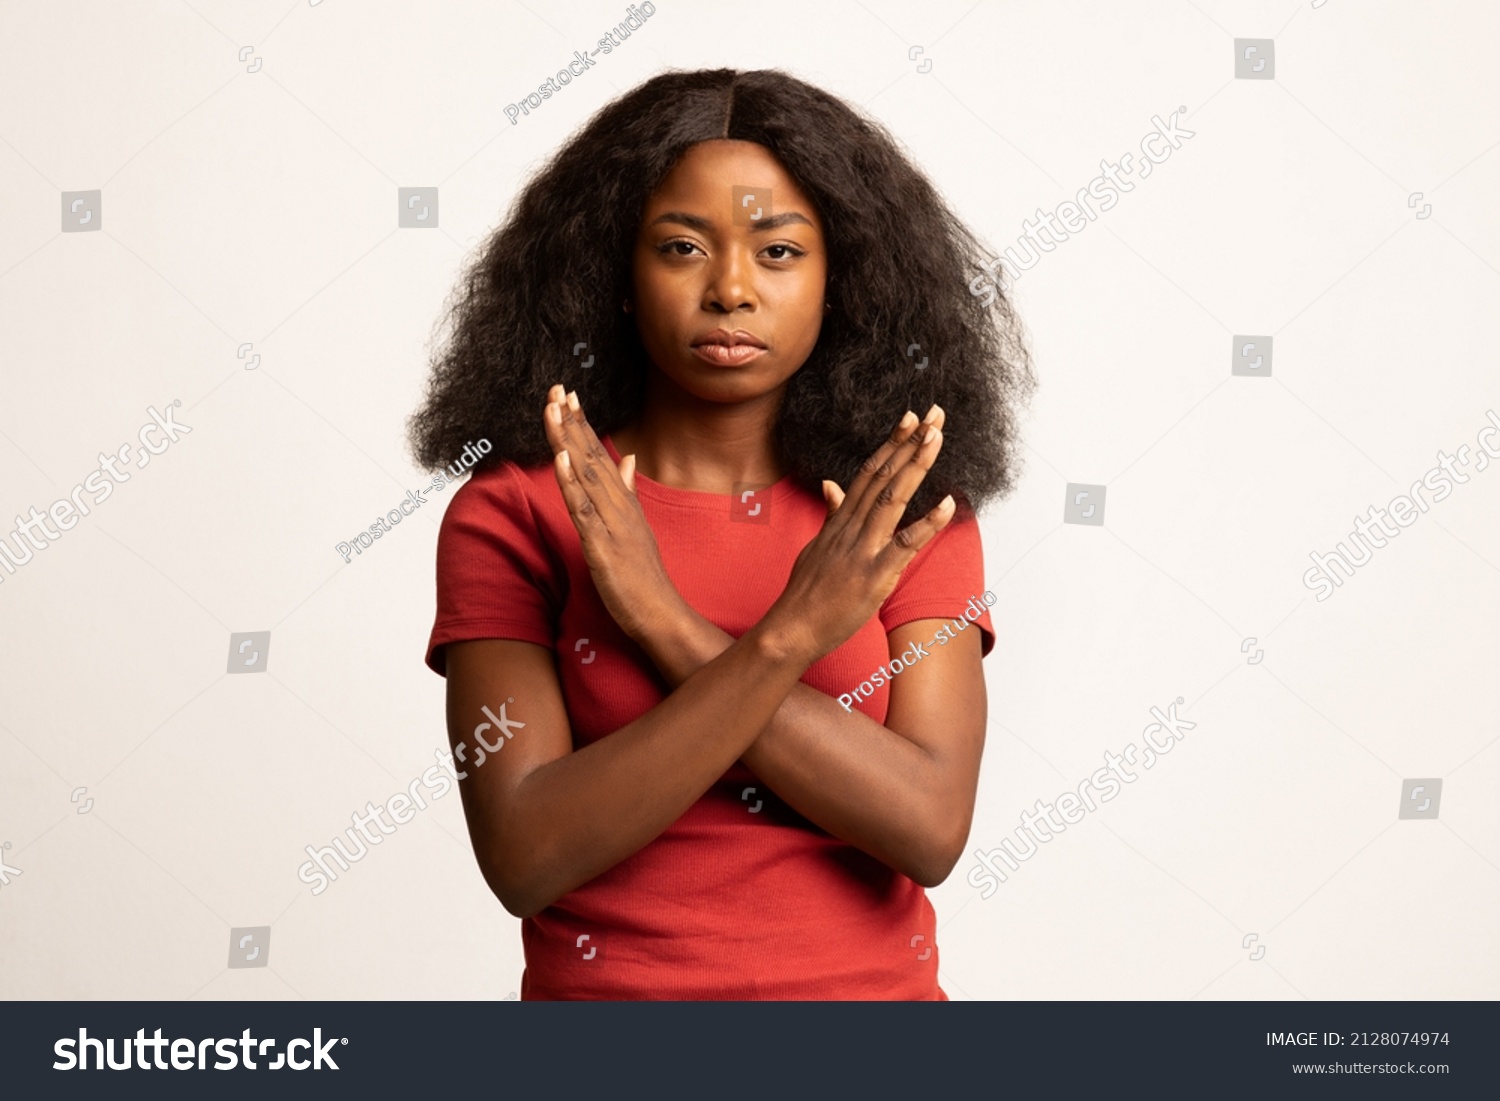 Portrait Of Young Black Female Showing Stop Gesture With Crossed Hands, Serious Millennial African American Woman Refusing Something While Posing Over White Studio Background, Copy Space #2128074974